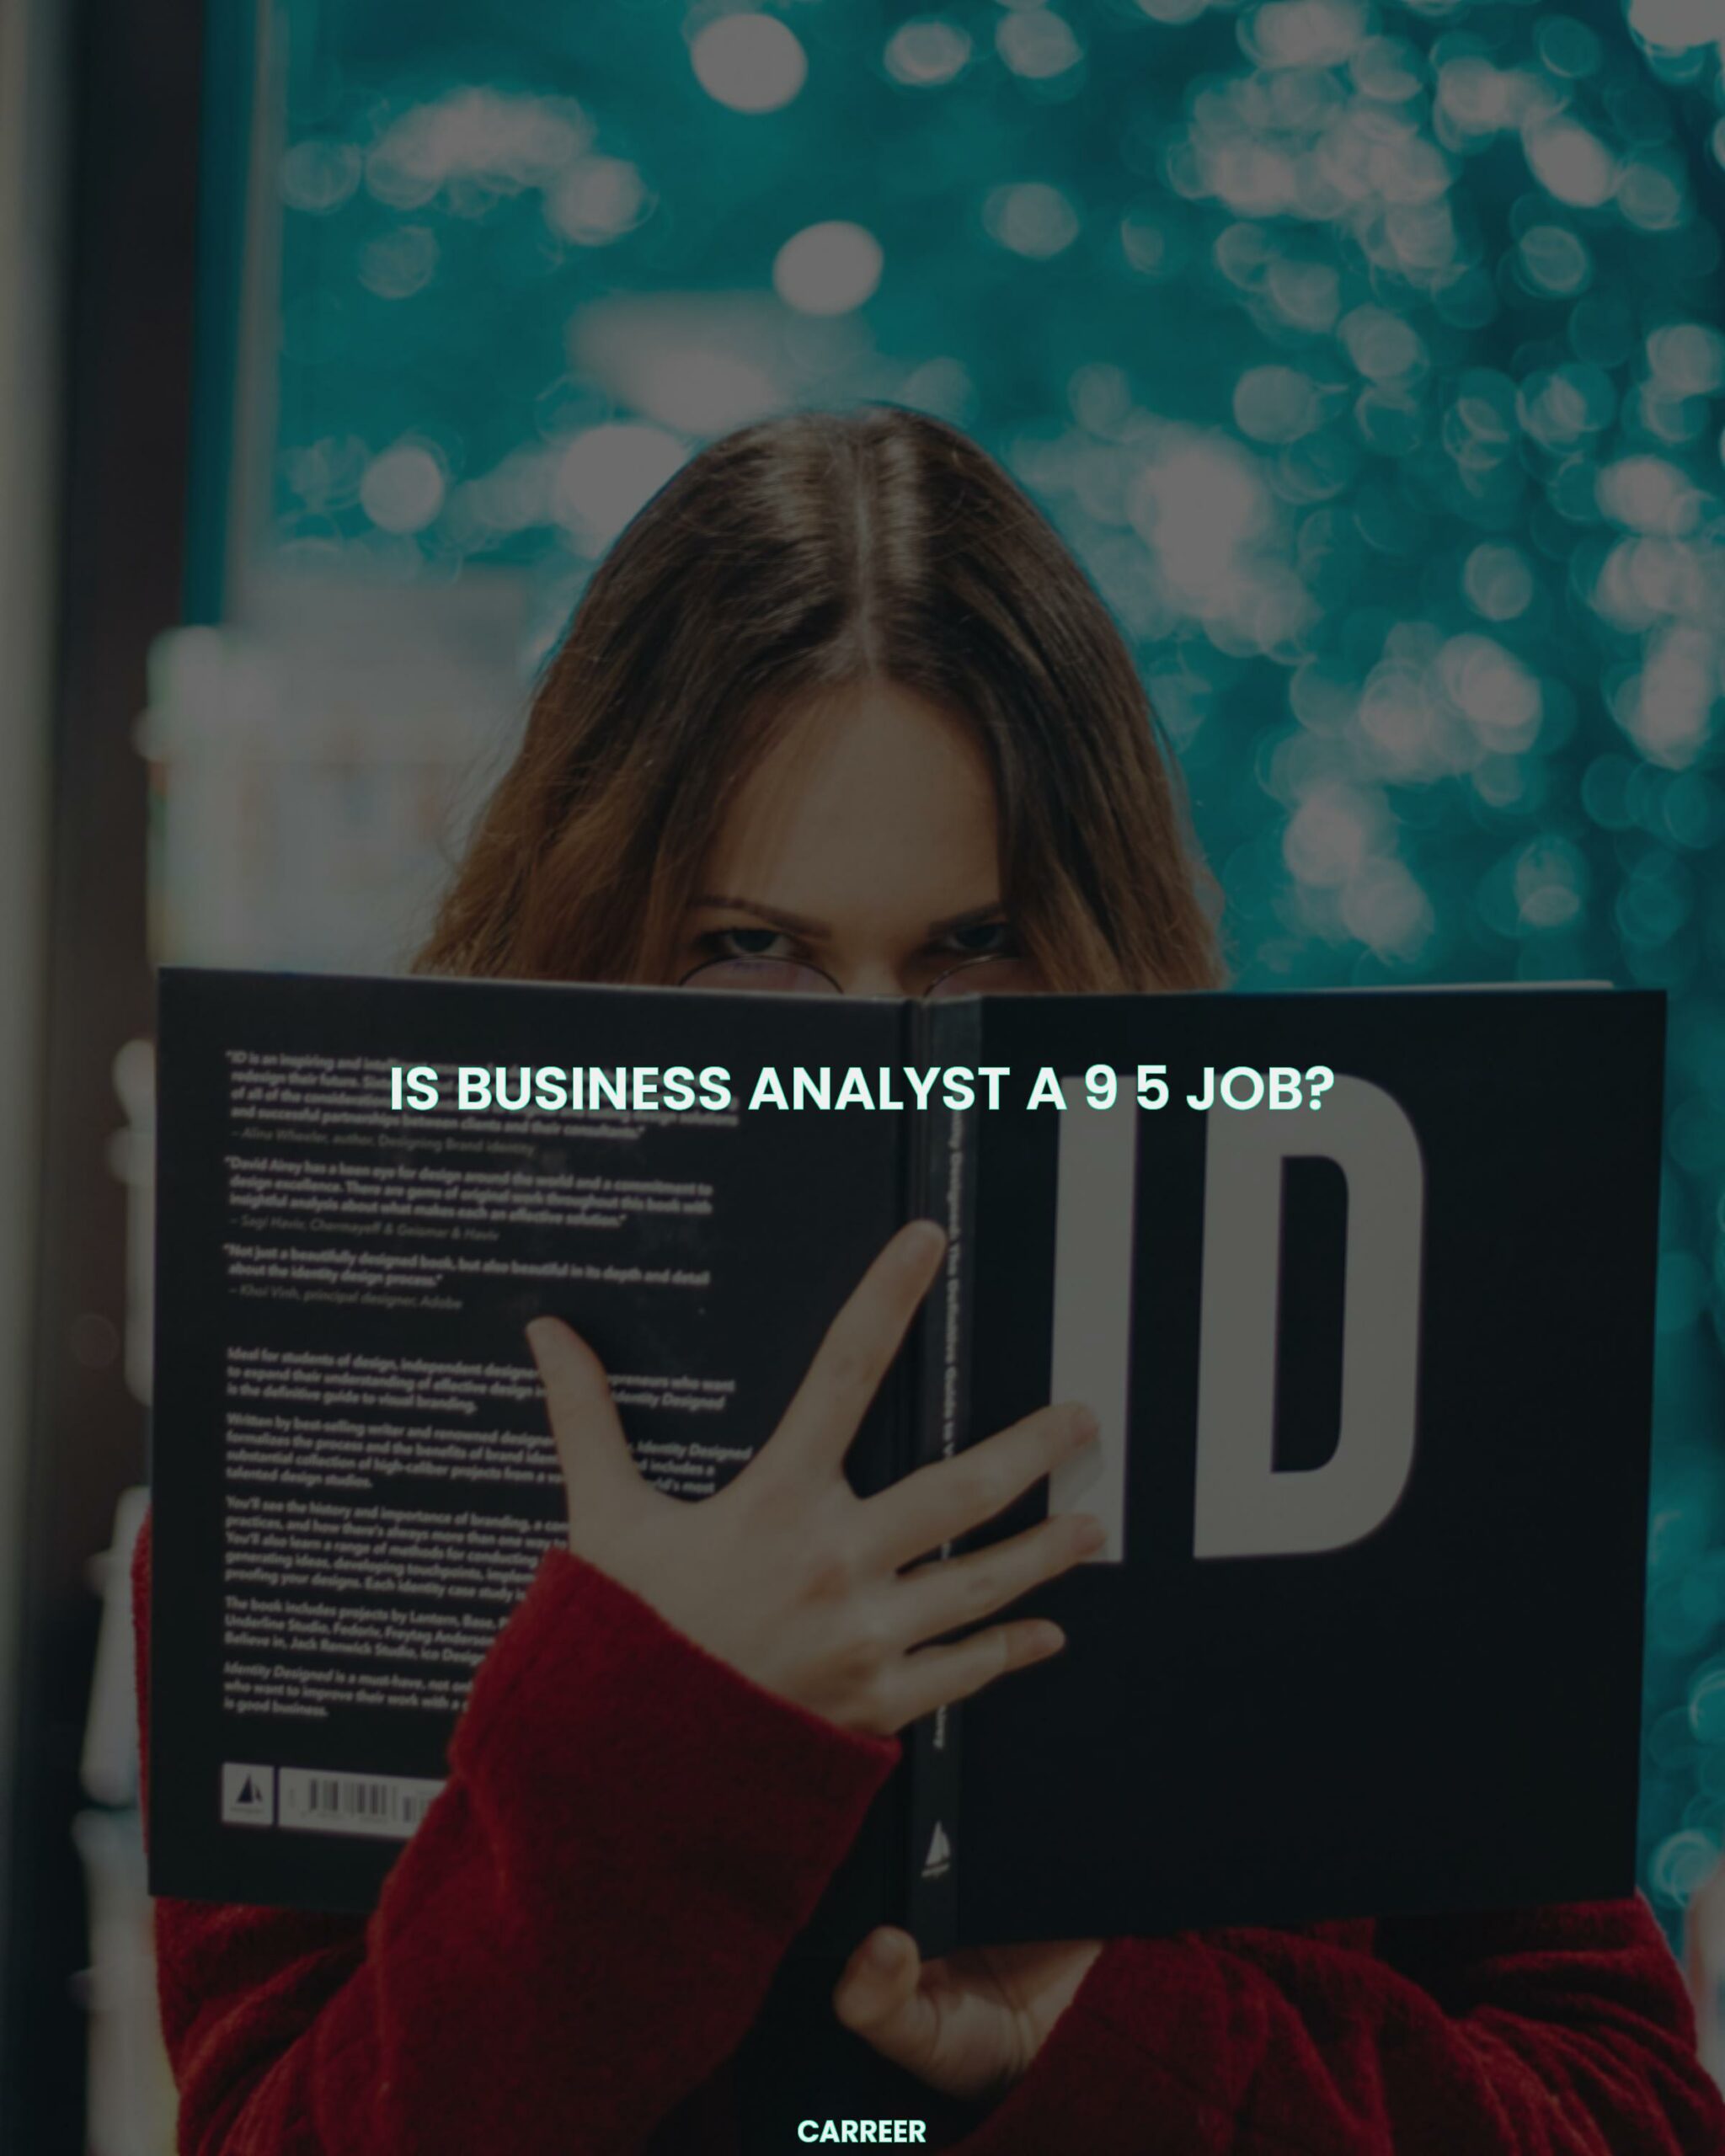 Is business analyst a 9 5 job?